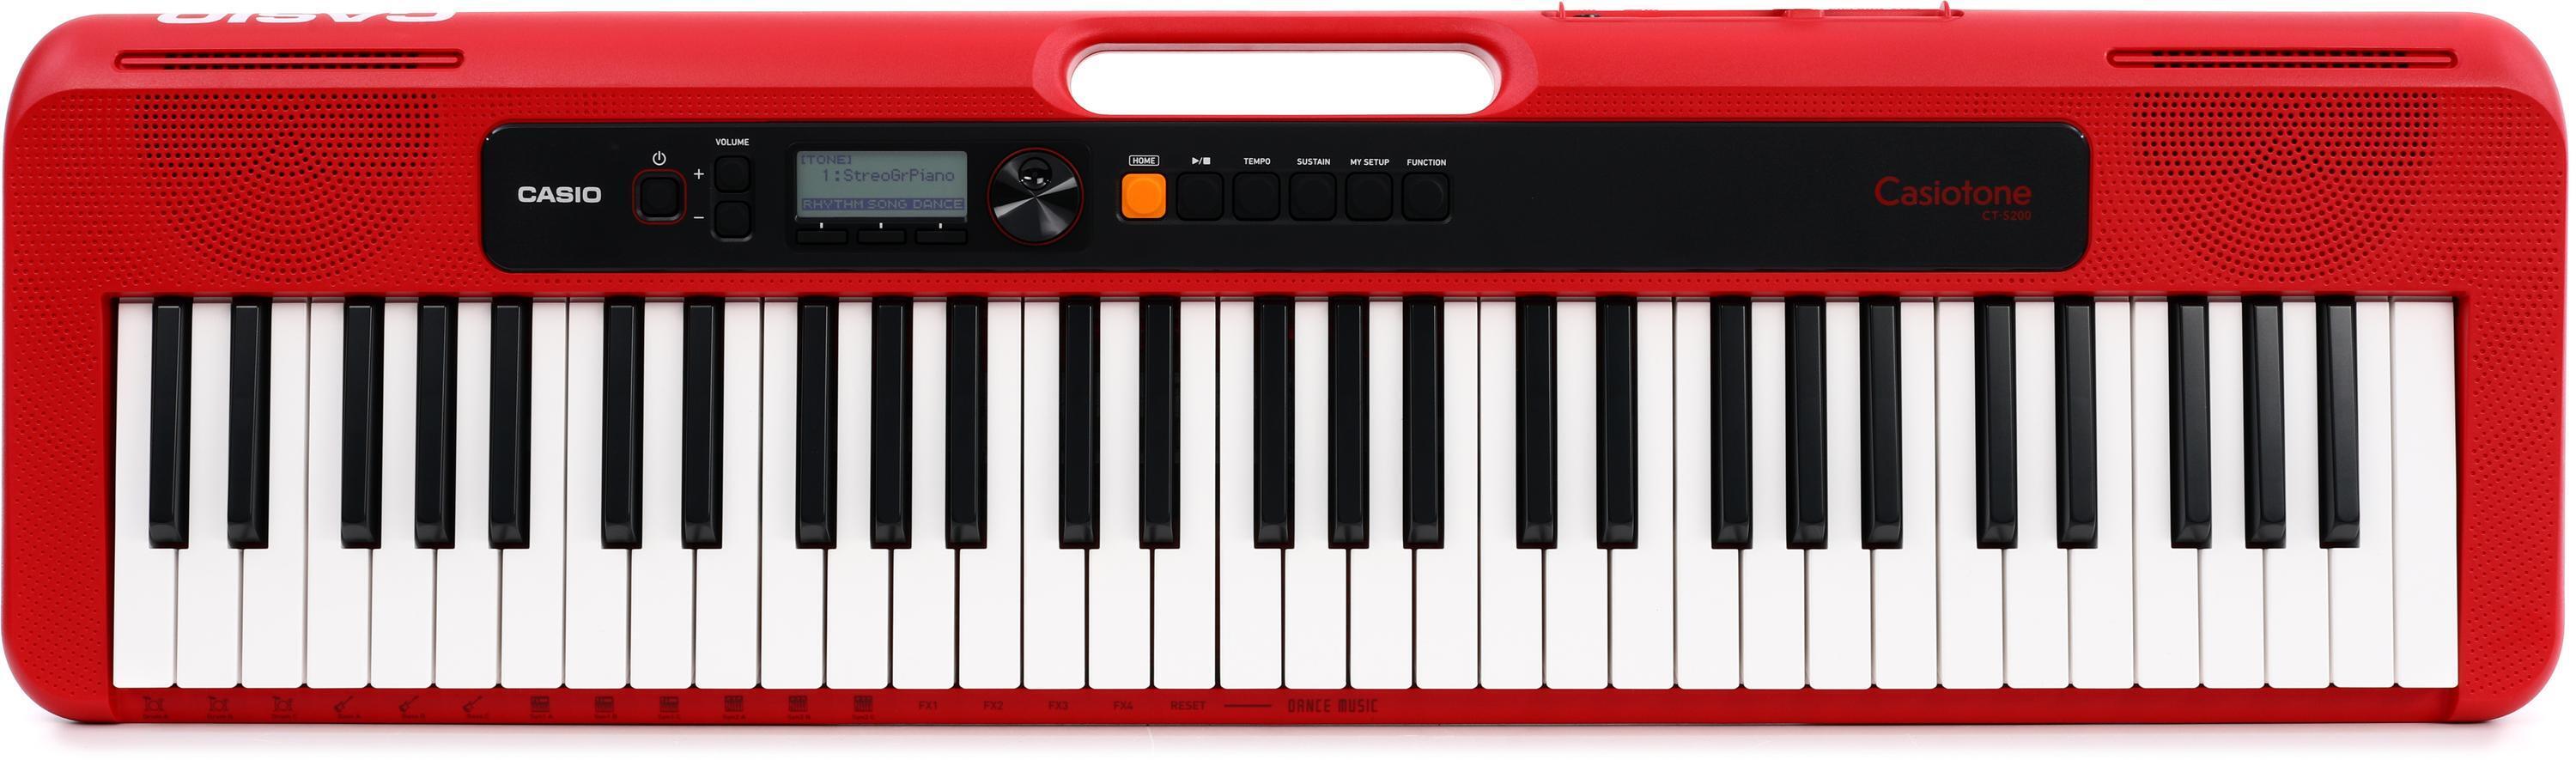 Casio Casiotone CT-S200 61-key Portable Arranger Keyboard - Red